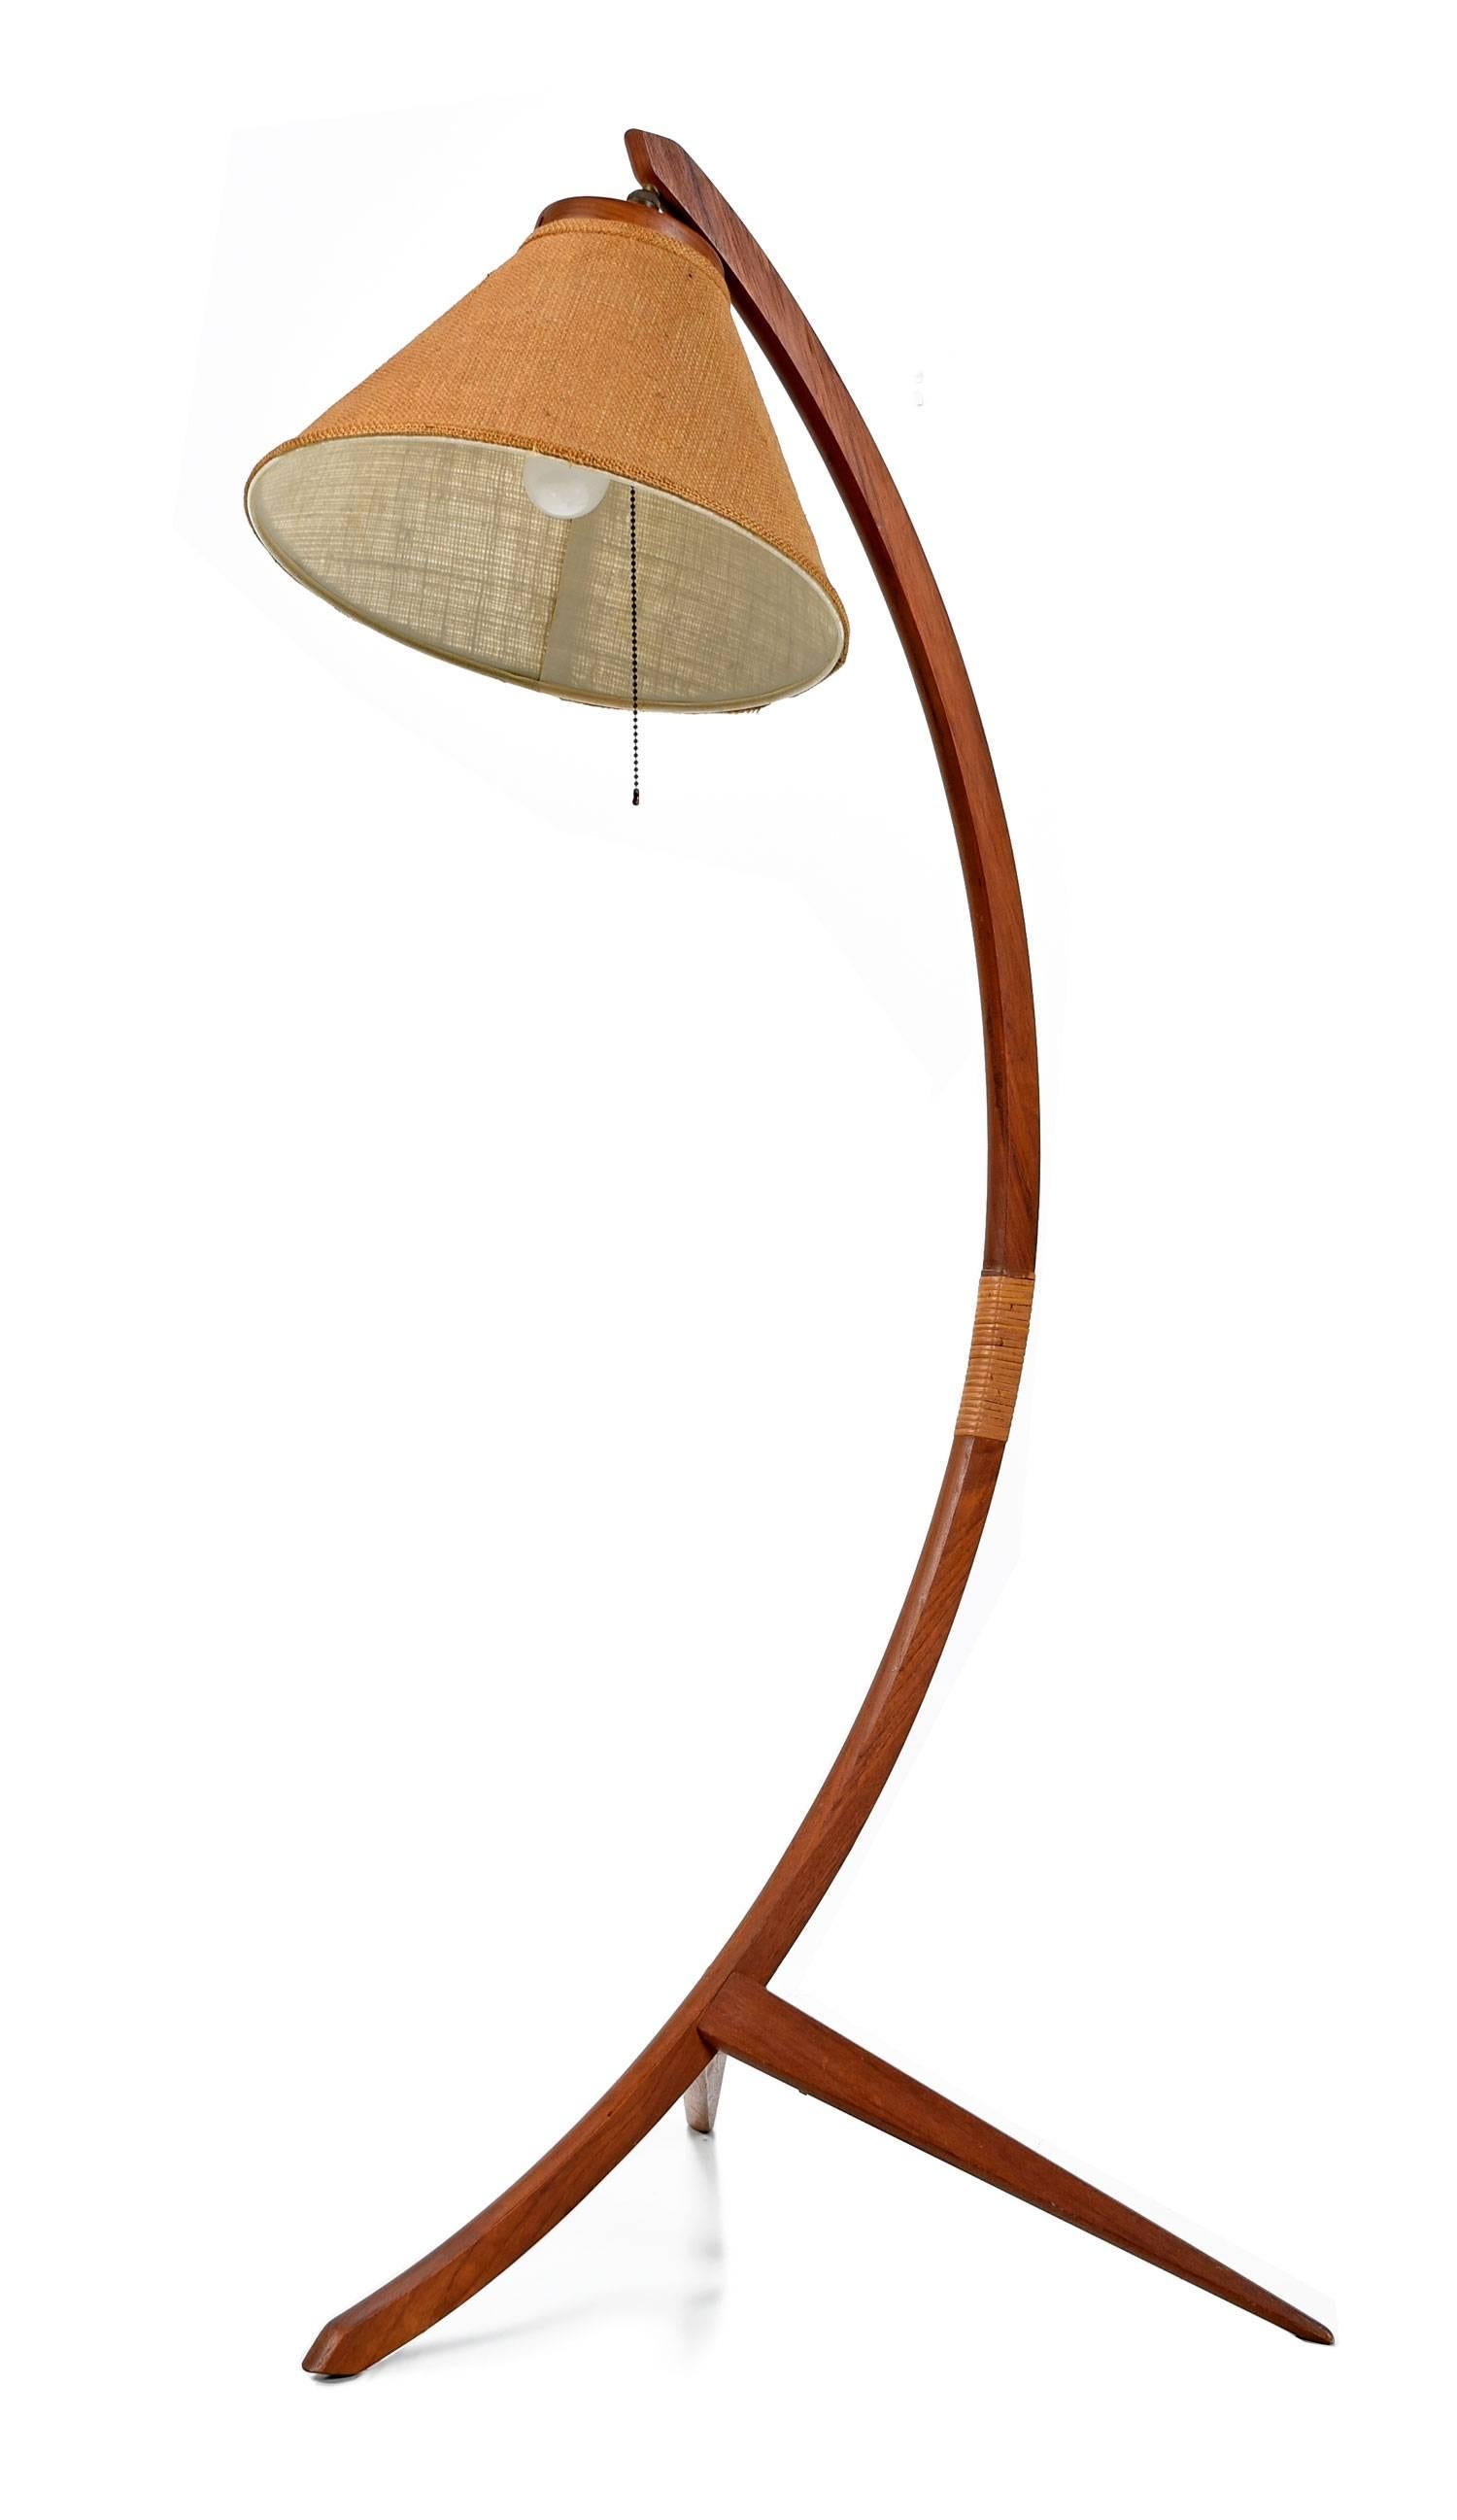 Iconic Mid-Century Modern Danish teak floor lamp in the style of Rispal, is all original, made in the 1960s. This solid teak floor lamp features a gorgeously sculpted bow shaped stem, resting on a tripod base, the articulating lampshade suspended